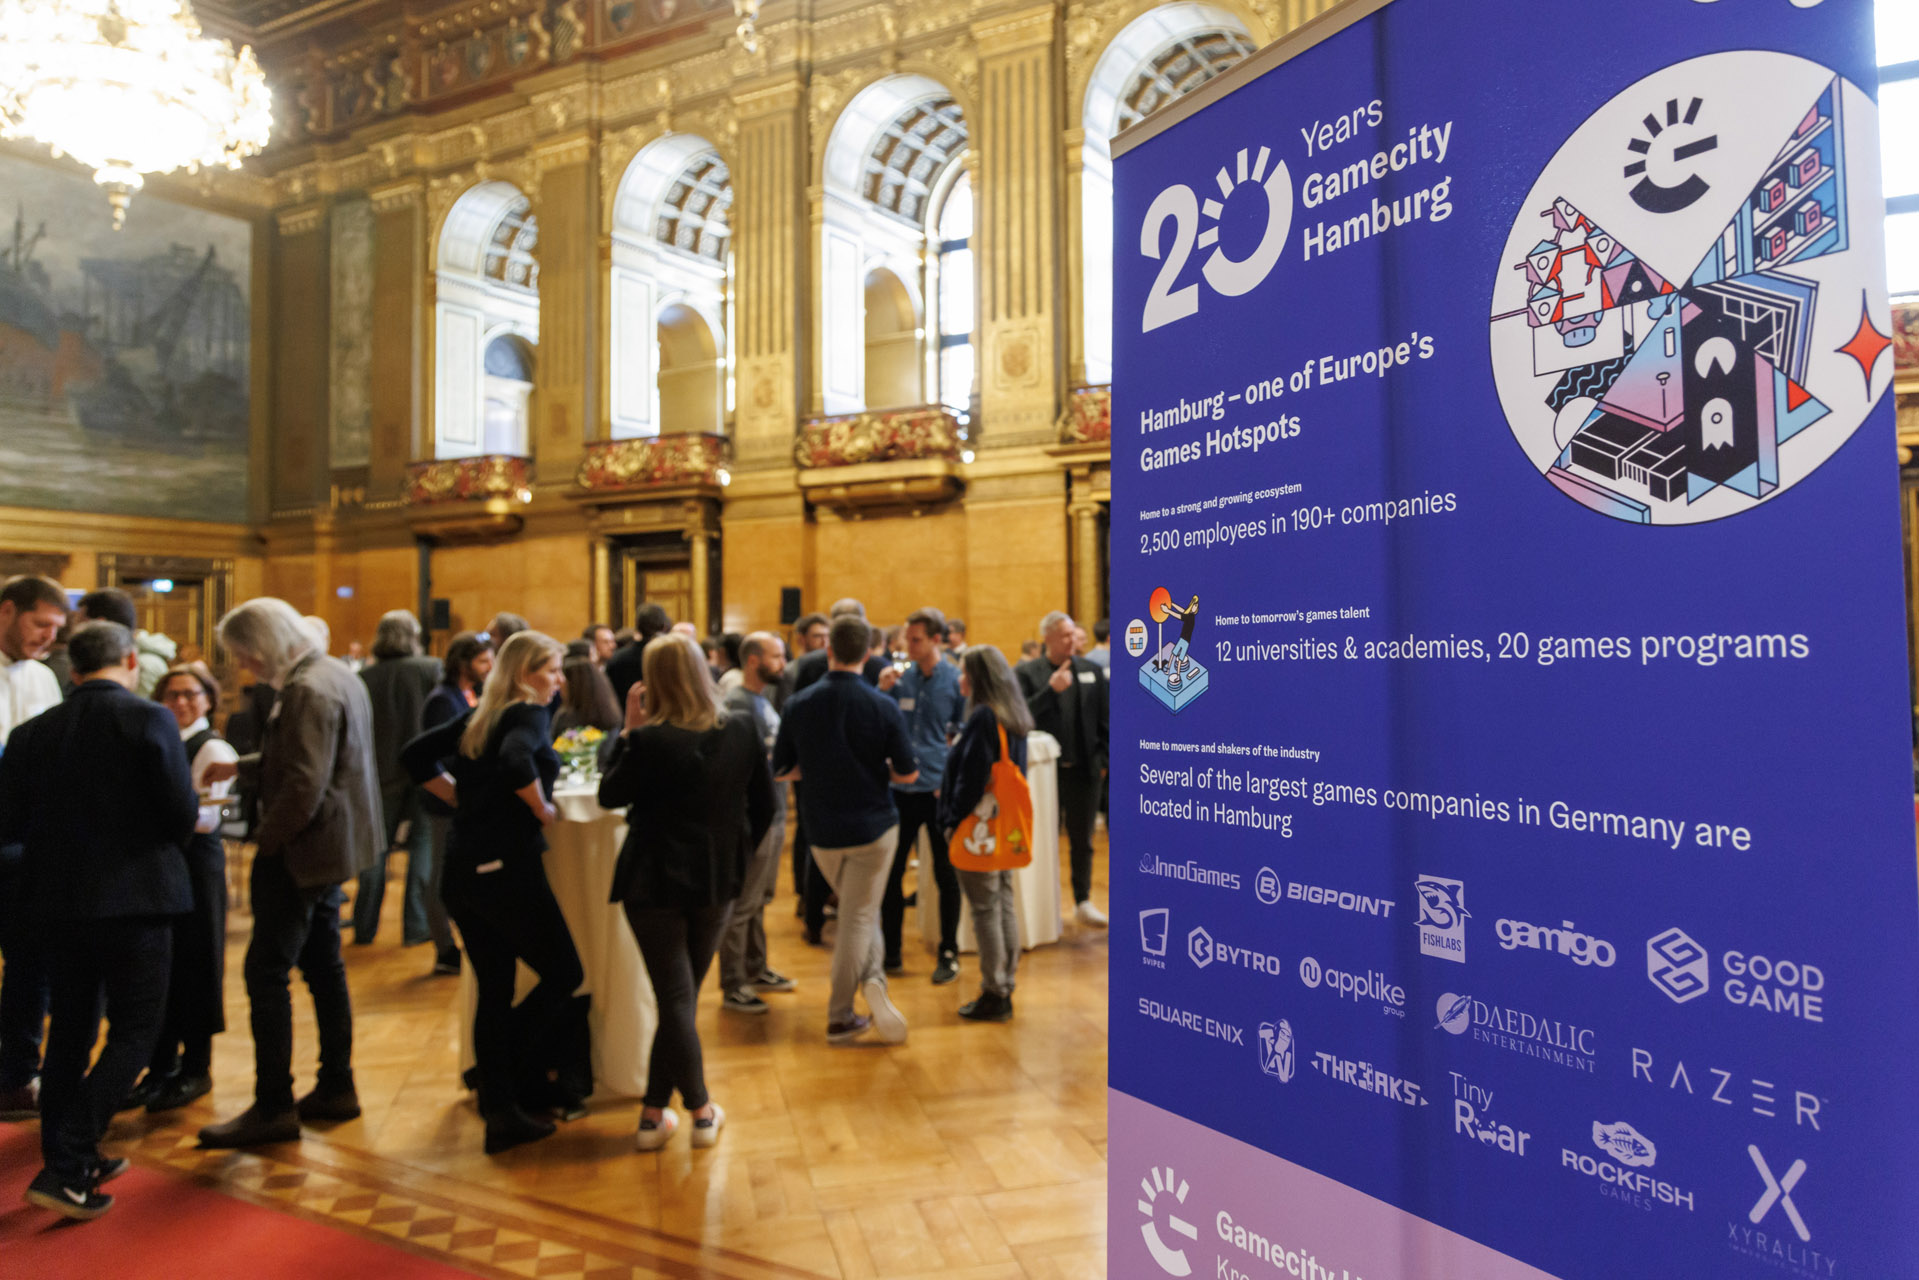 Networking after the speeches and panel discussion at Hamburg City Hall / Photo by Marcelo Hernandez